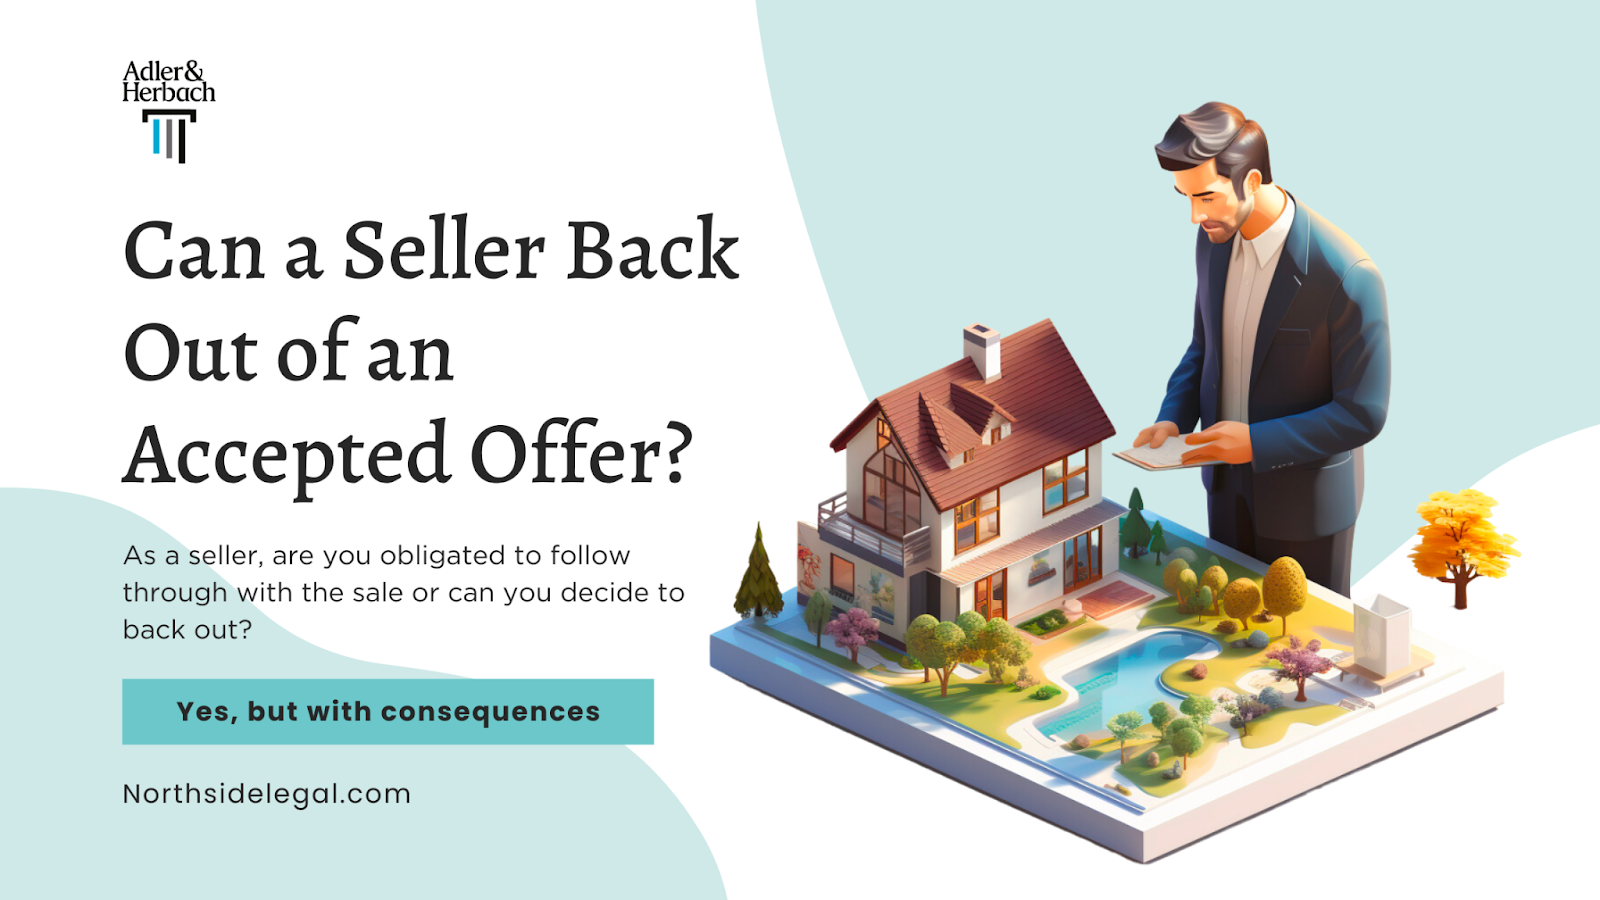 Can a Seller Back Out of an Accepted Offer in Chicago?